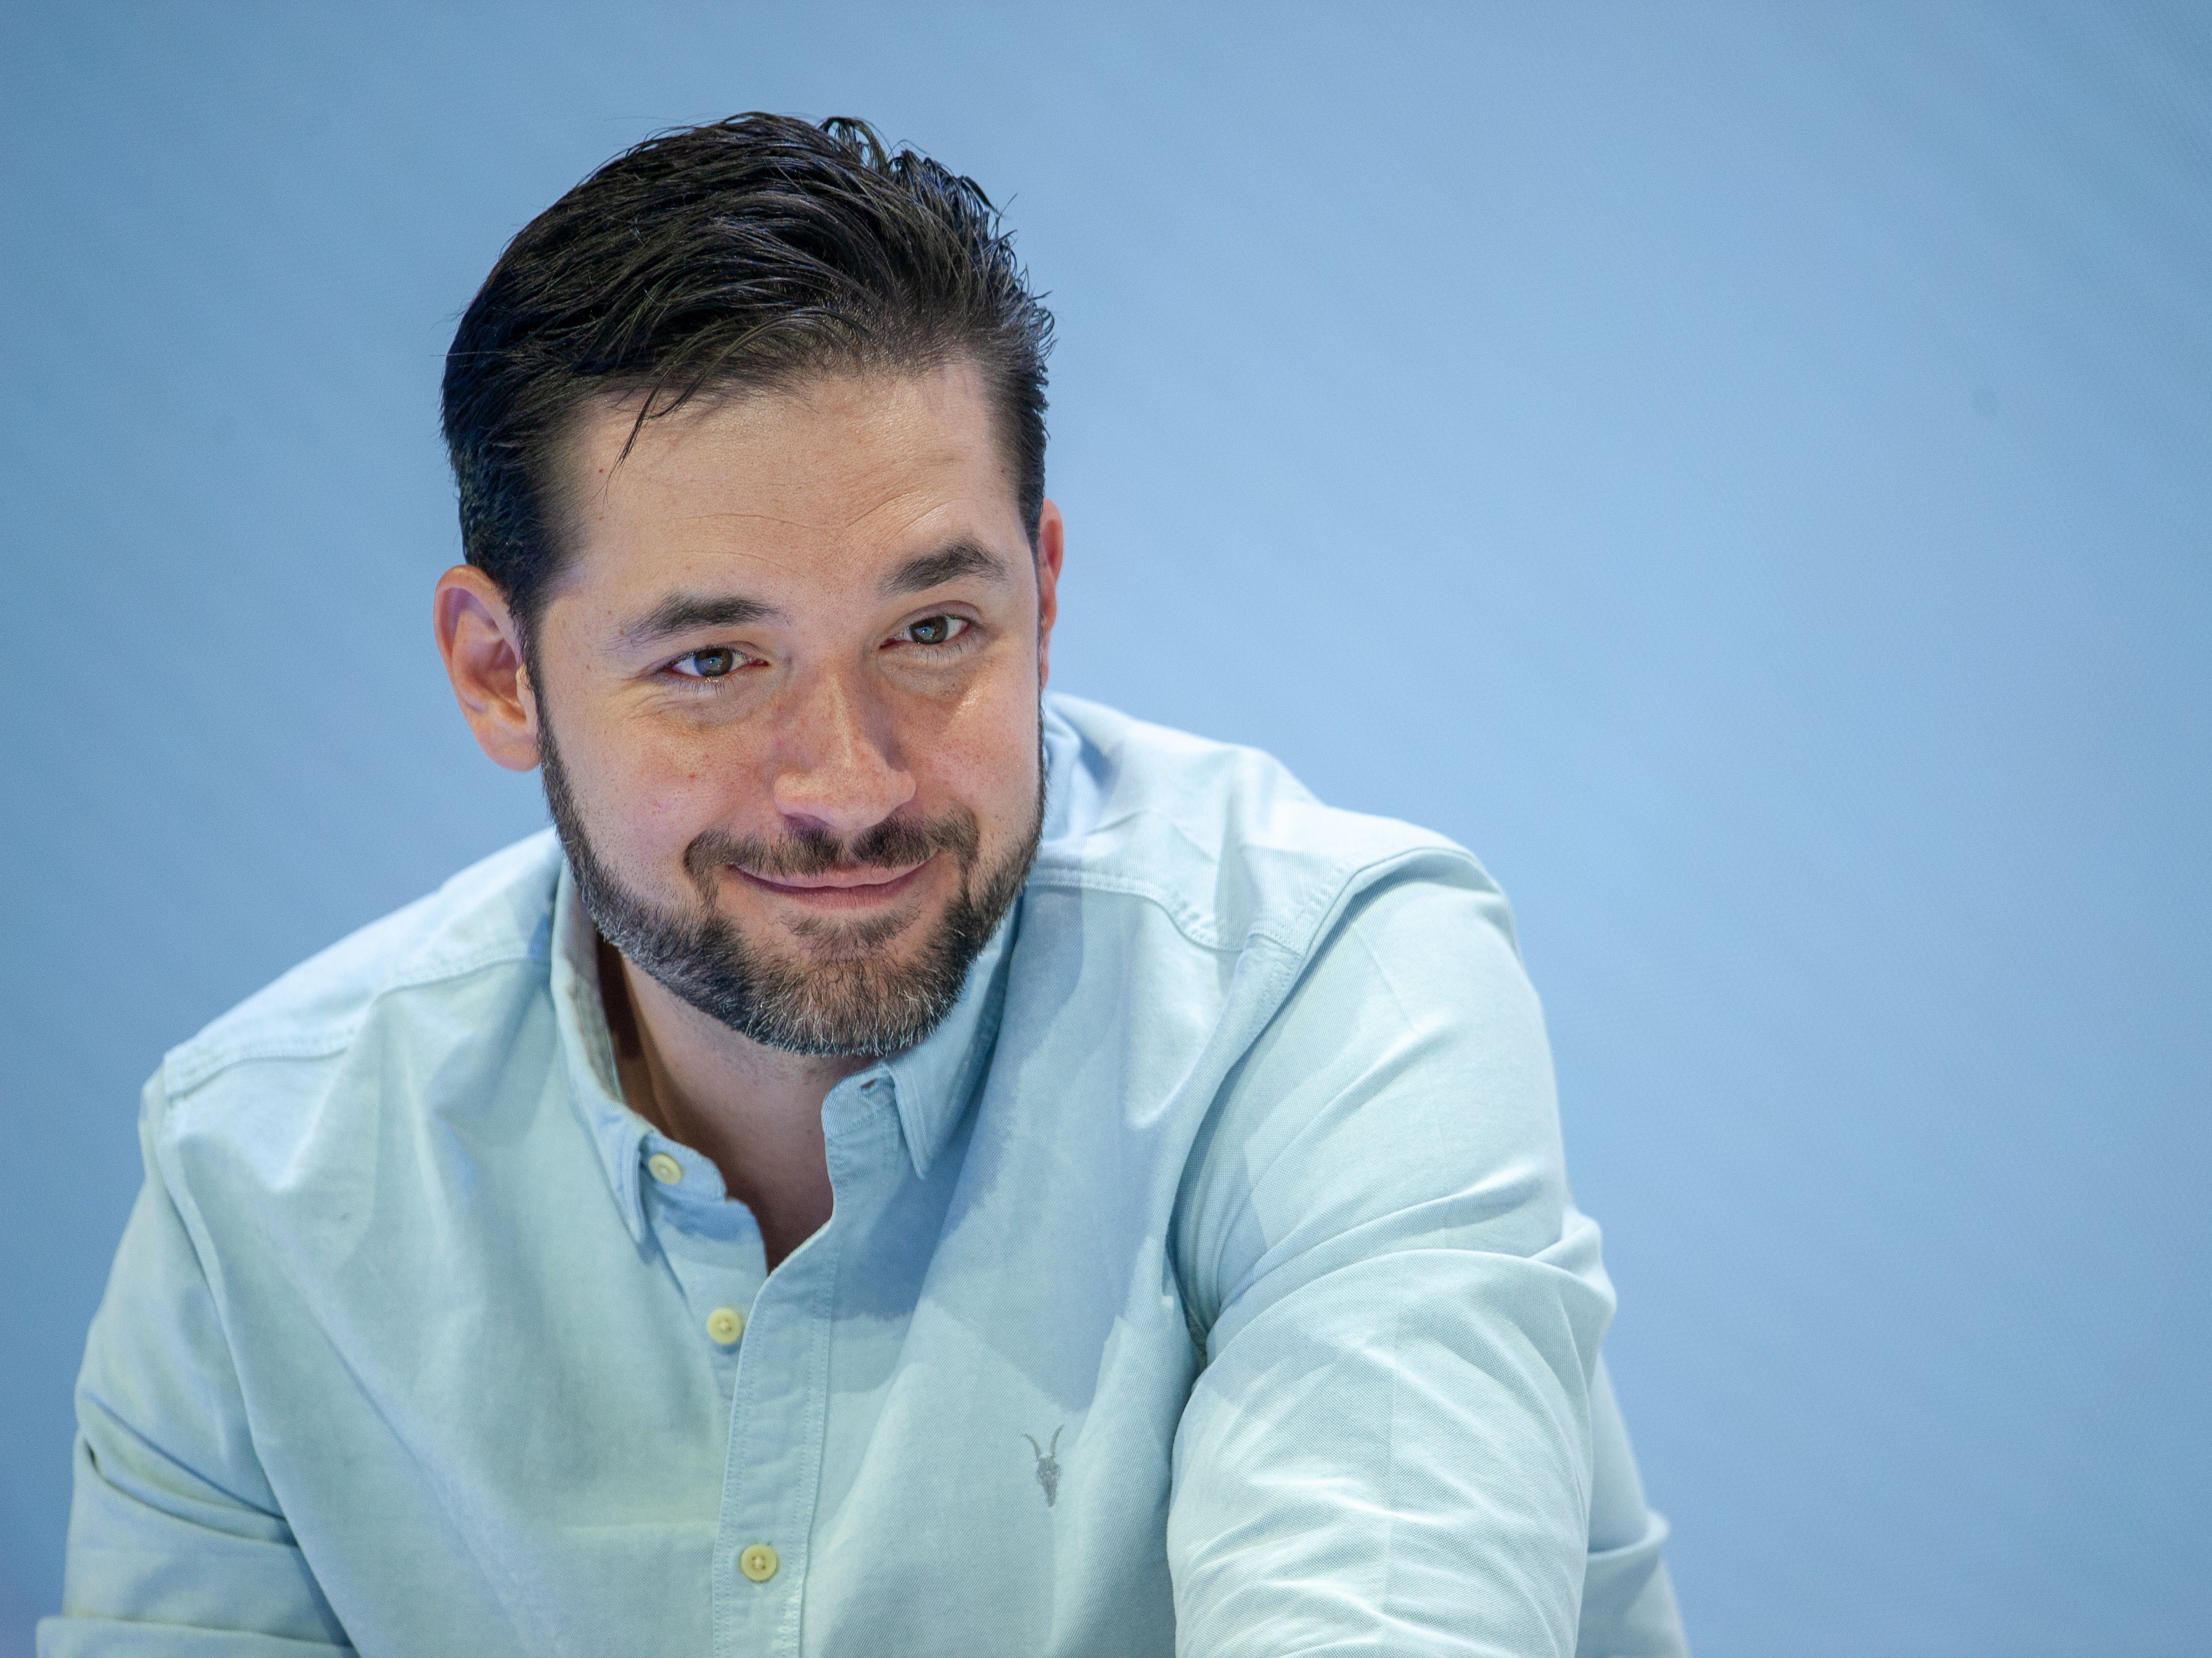 Reddit co-founder and chairman, Alexis Ohanian